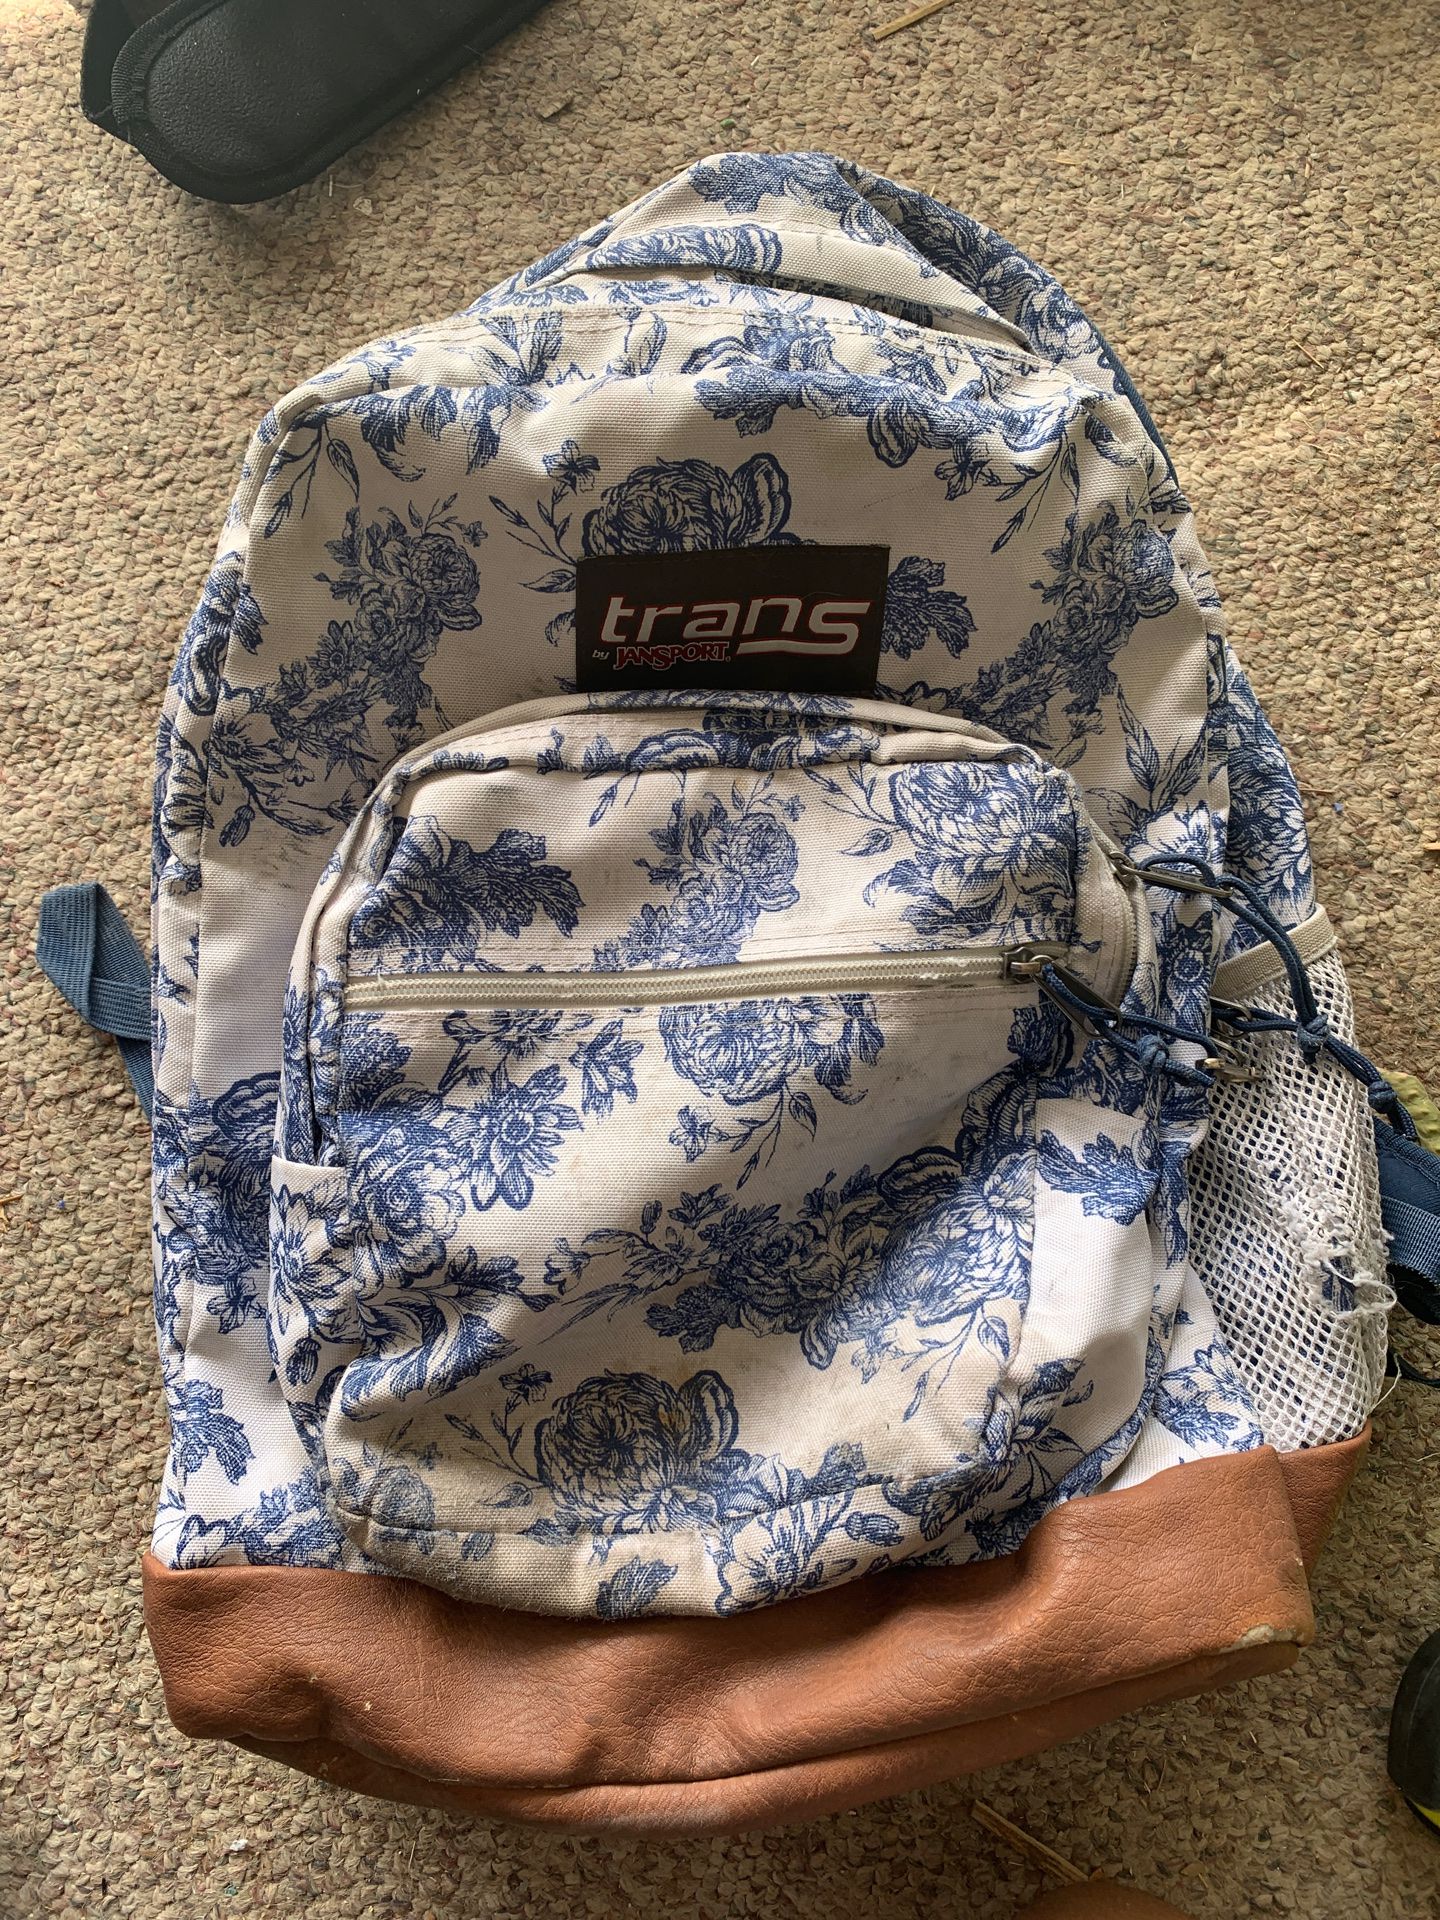 Jansport Trans blue and white with leather accent backpack